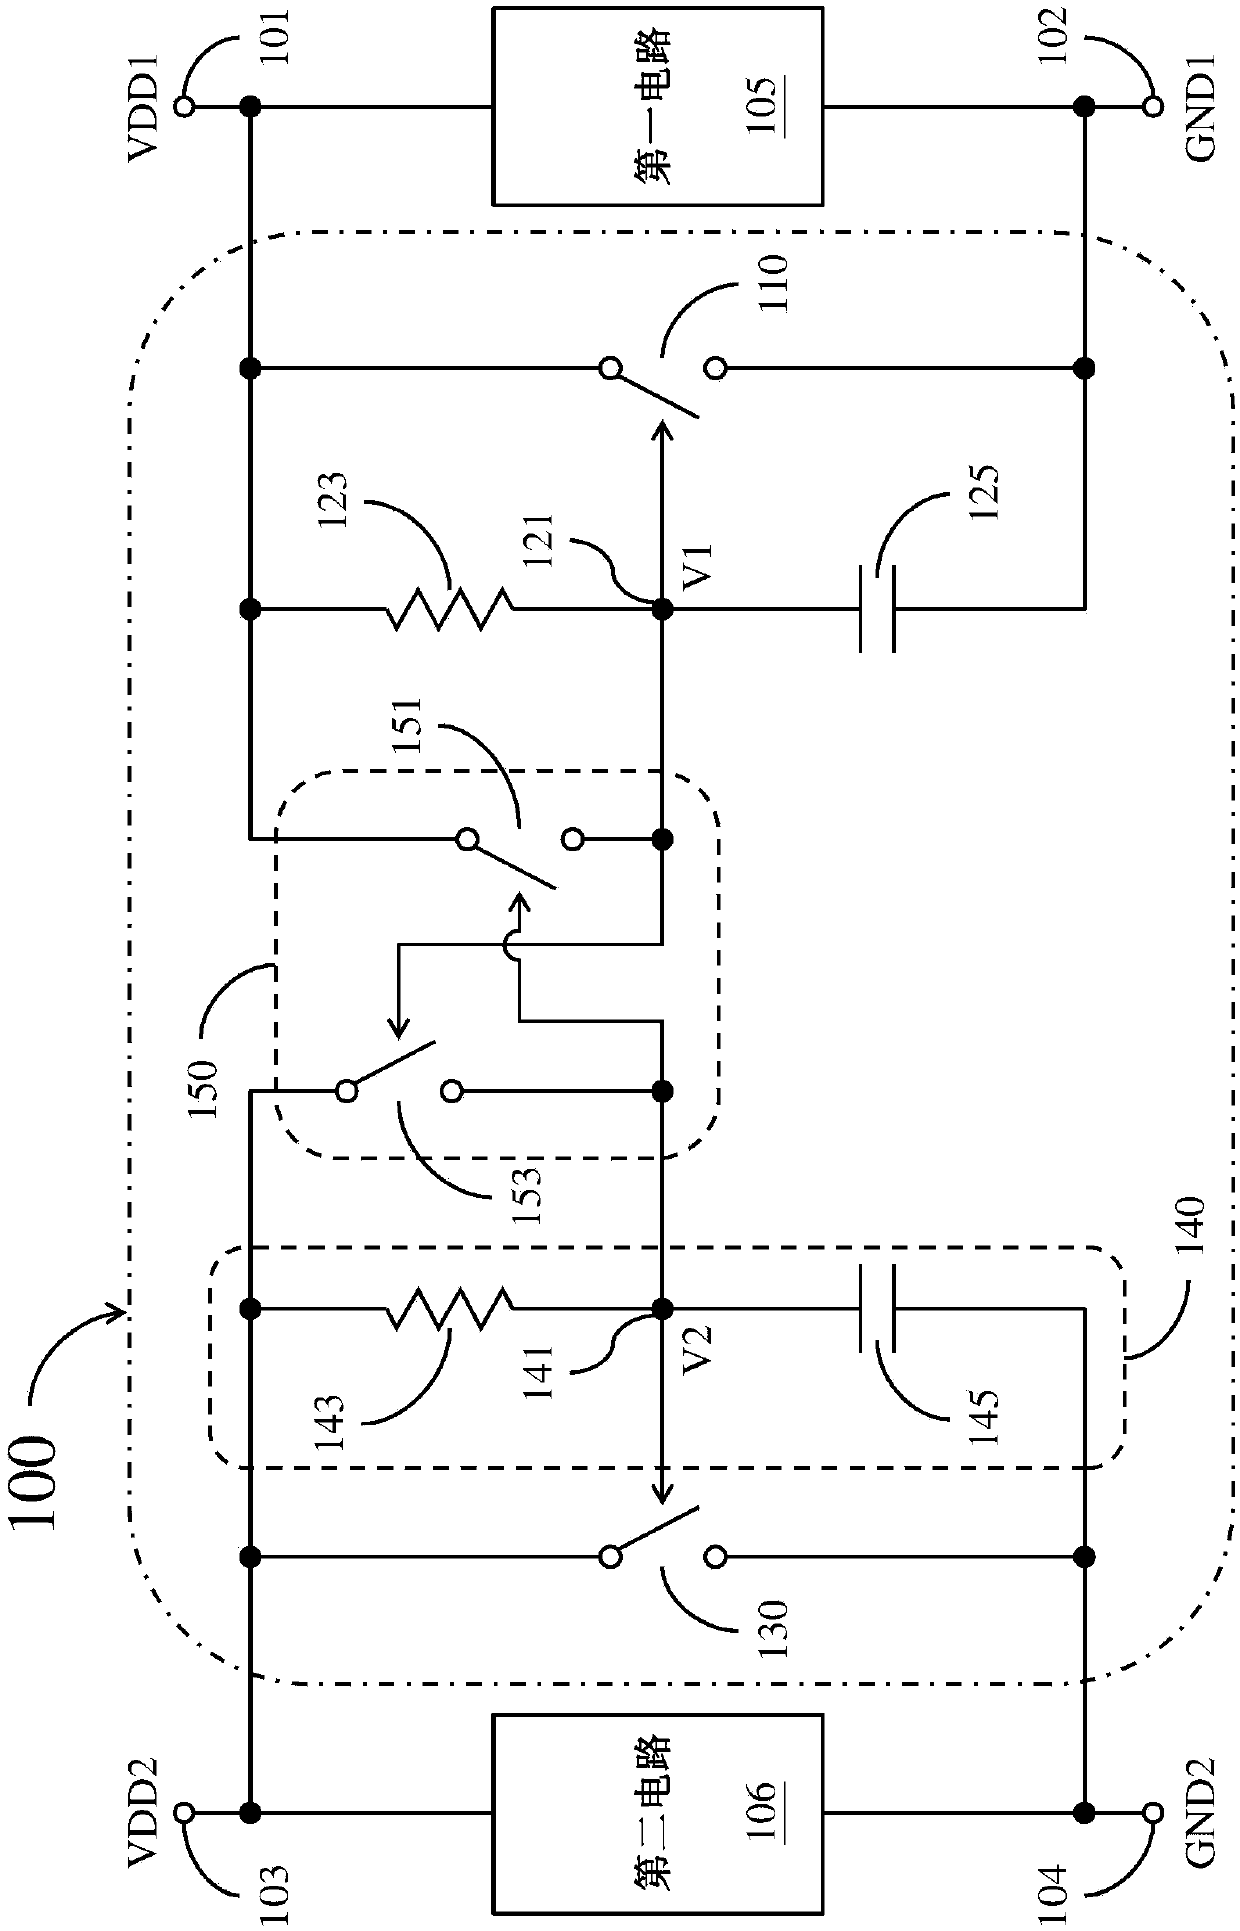 Cross-power-domain electrostatic discharge protection circuit